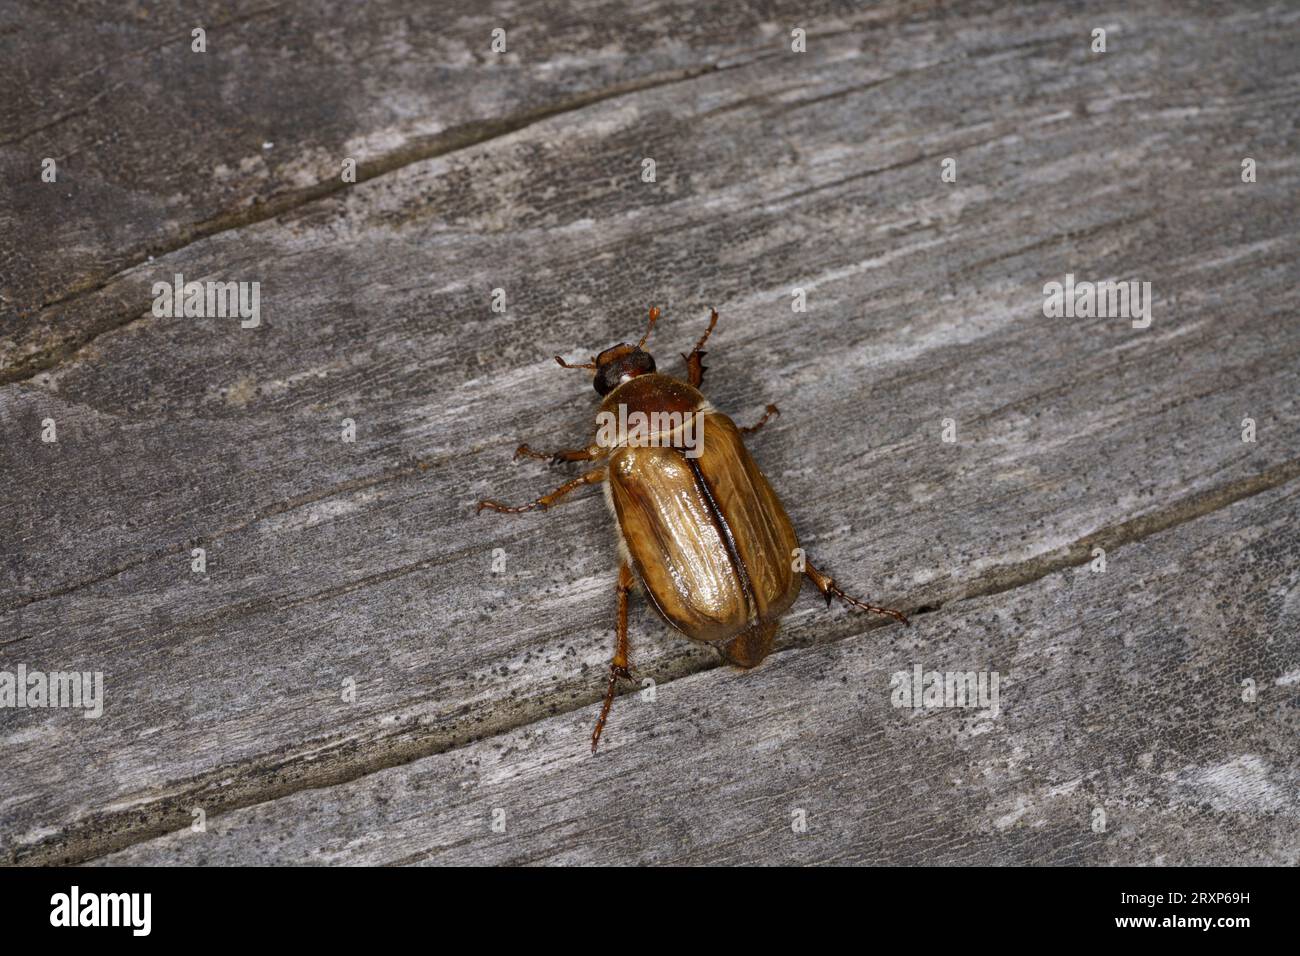 Amphimallon solstitiale Family Scarabaeidae Genus Amphimallon Summer chafer European june beetle wild nature insect photography, picture, wallpaper Stock Photo